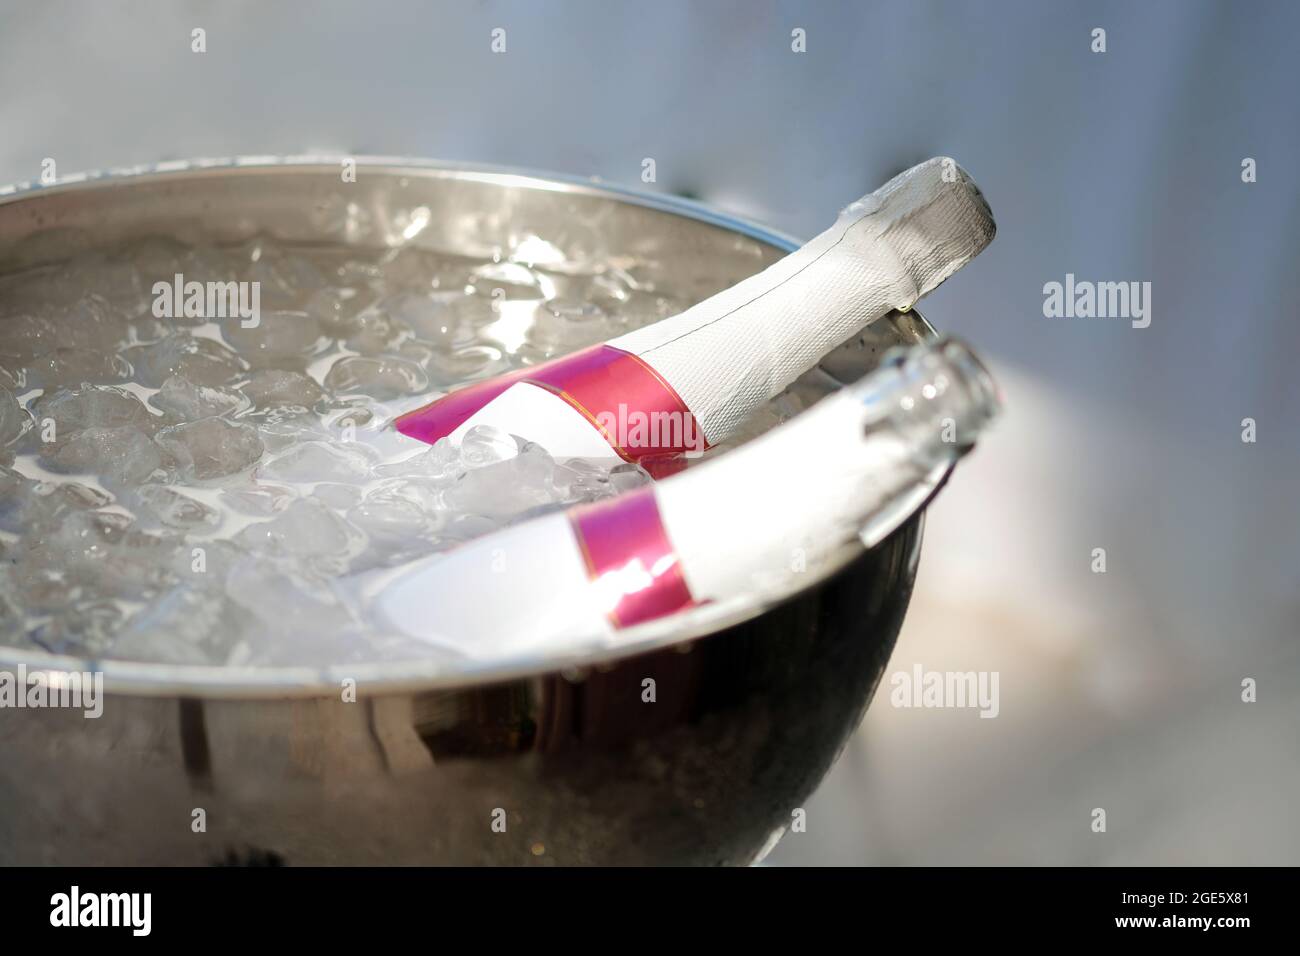 Champagne cold glass bottle drinks, filled ice cubes in a cool box photo.  Stock Photo